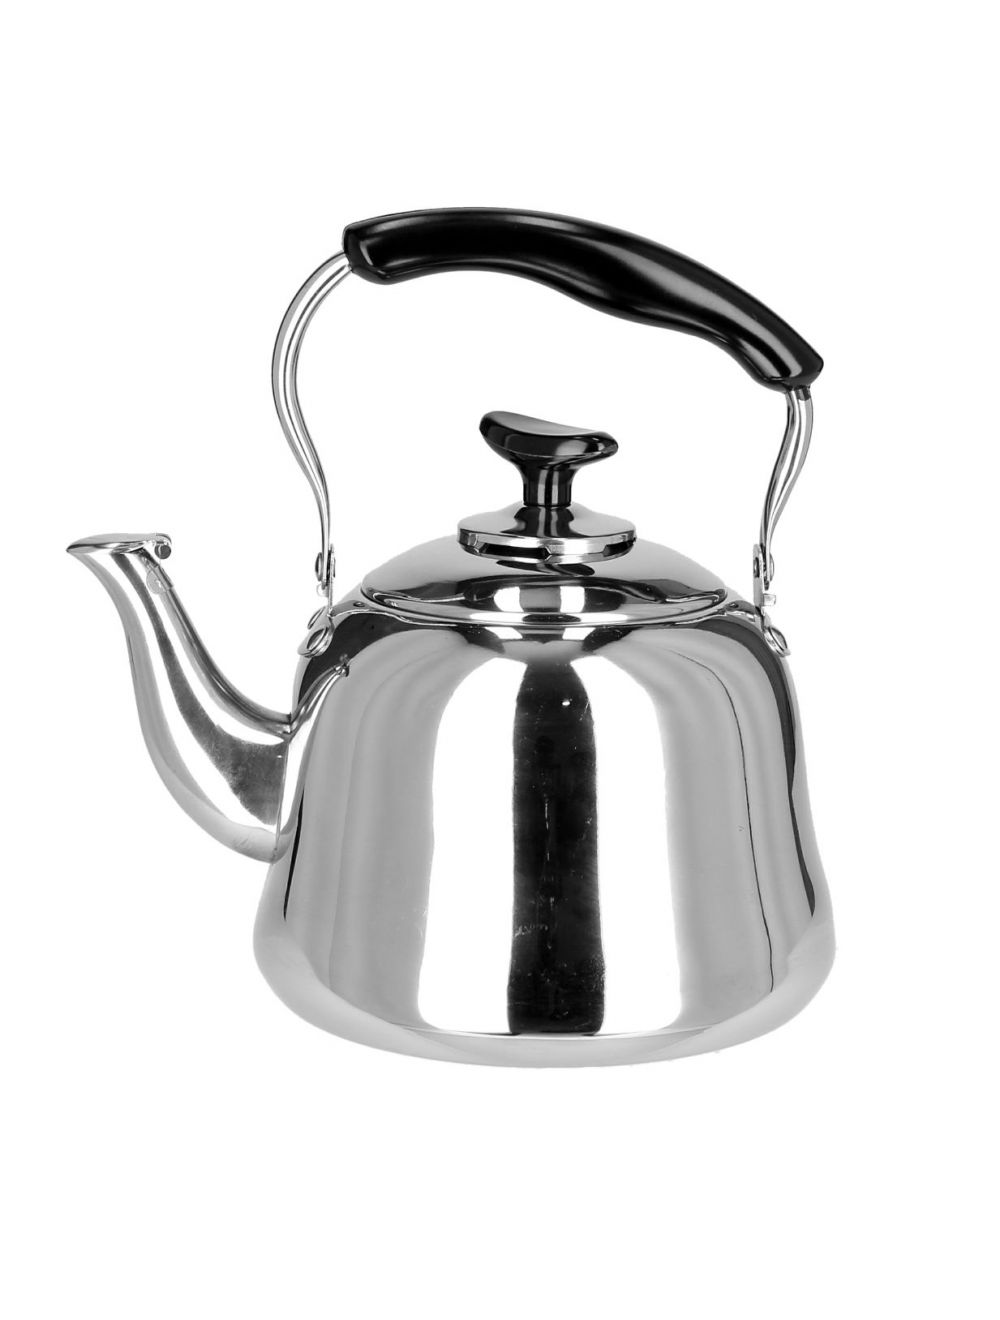 Royalford 5.0L Stainless Steel Whistling Kettle